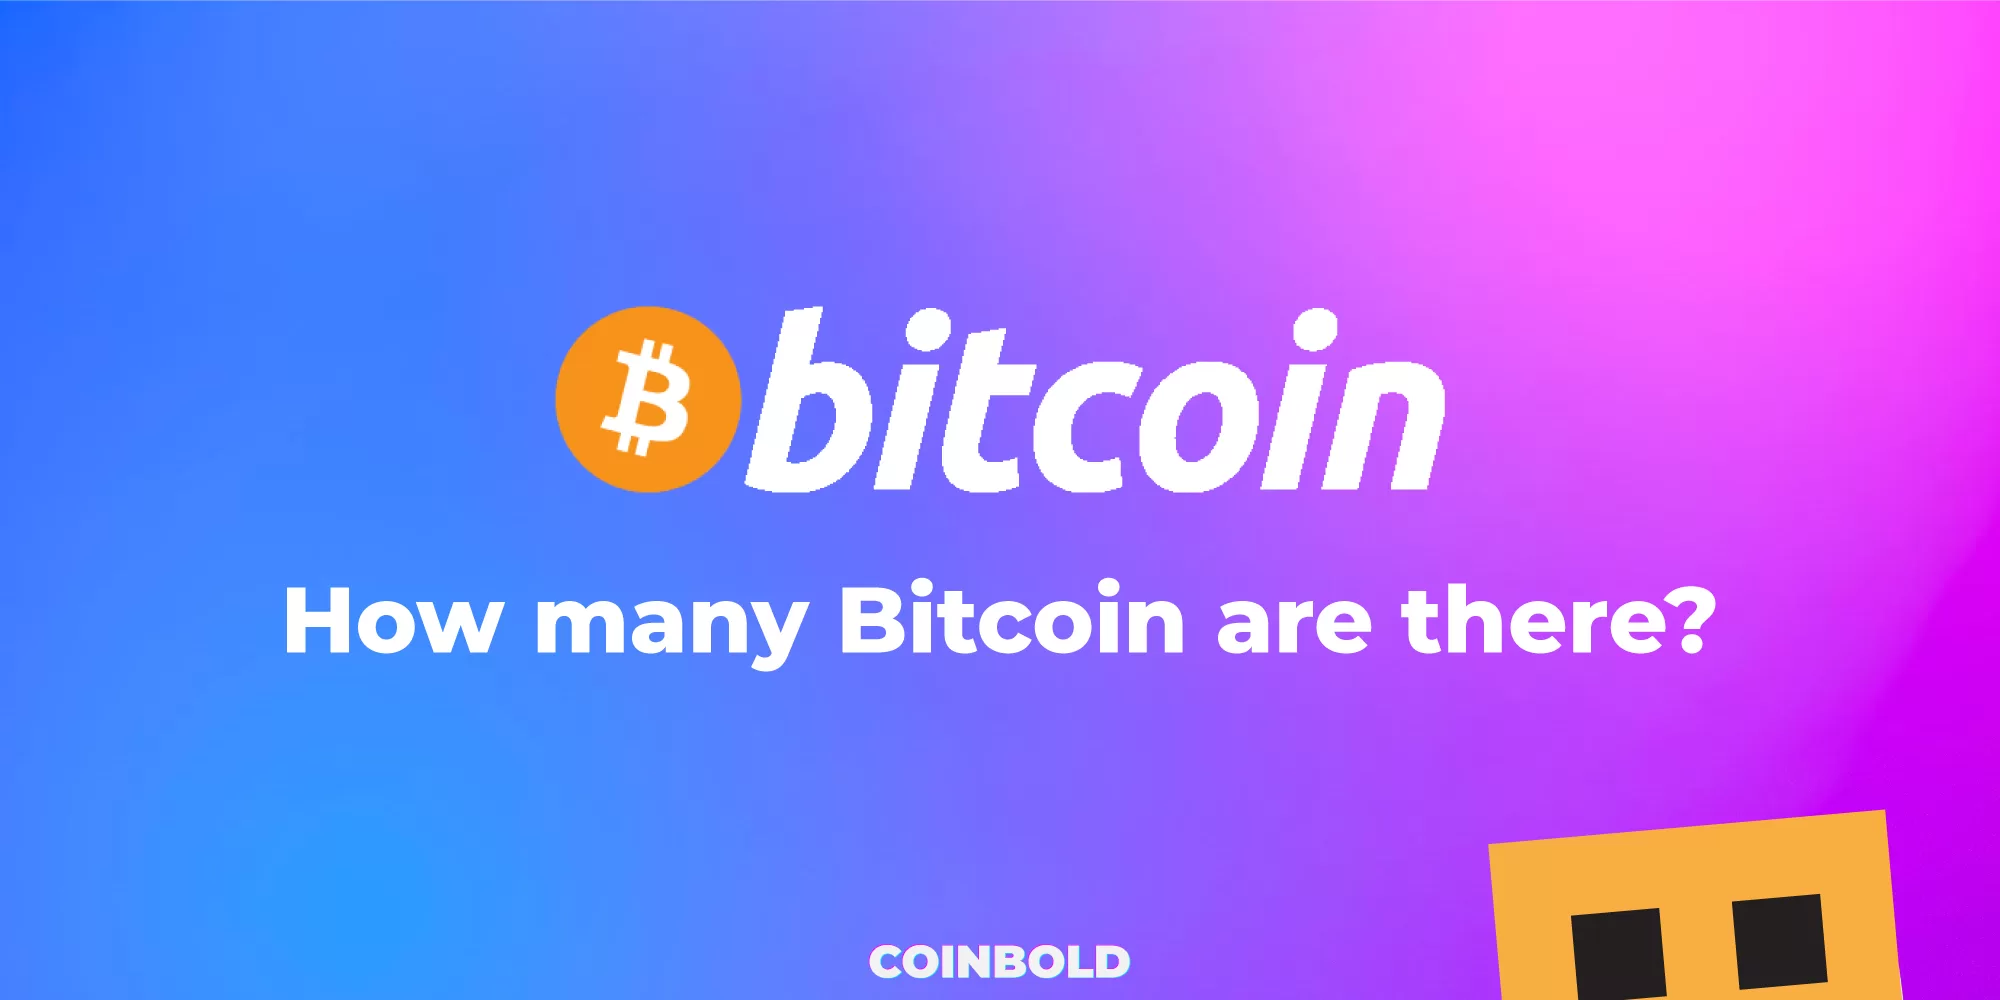 How many Bitcoin are there